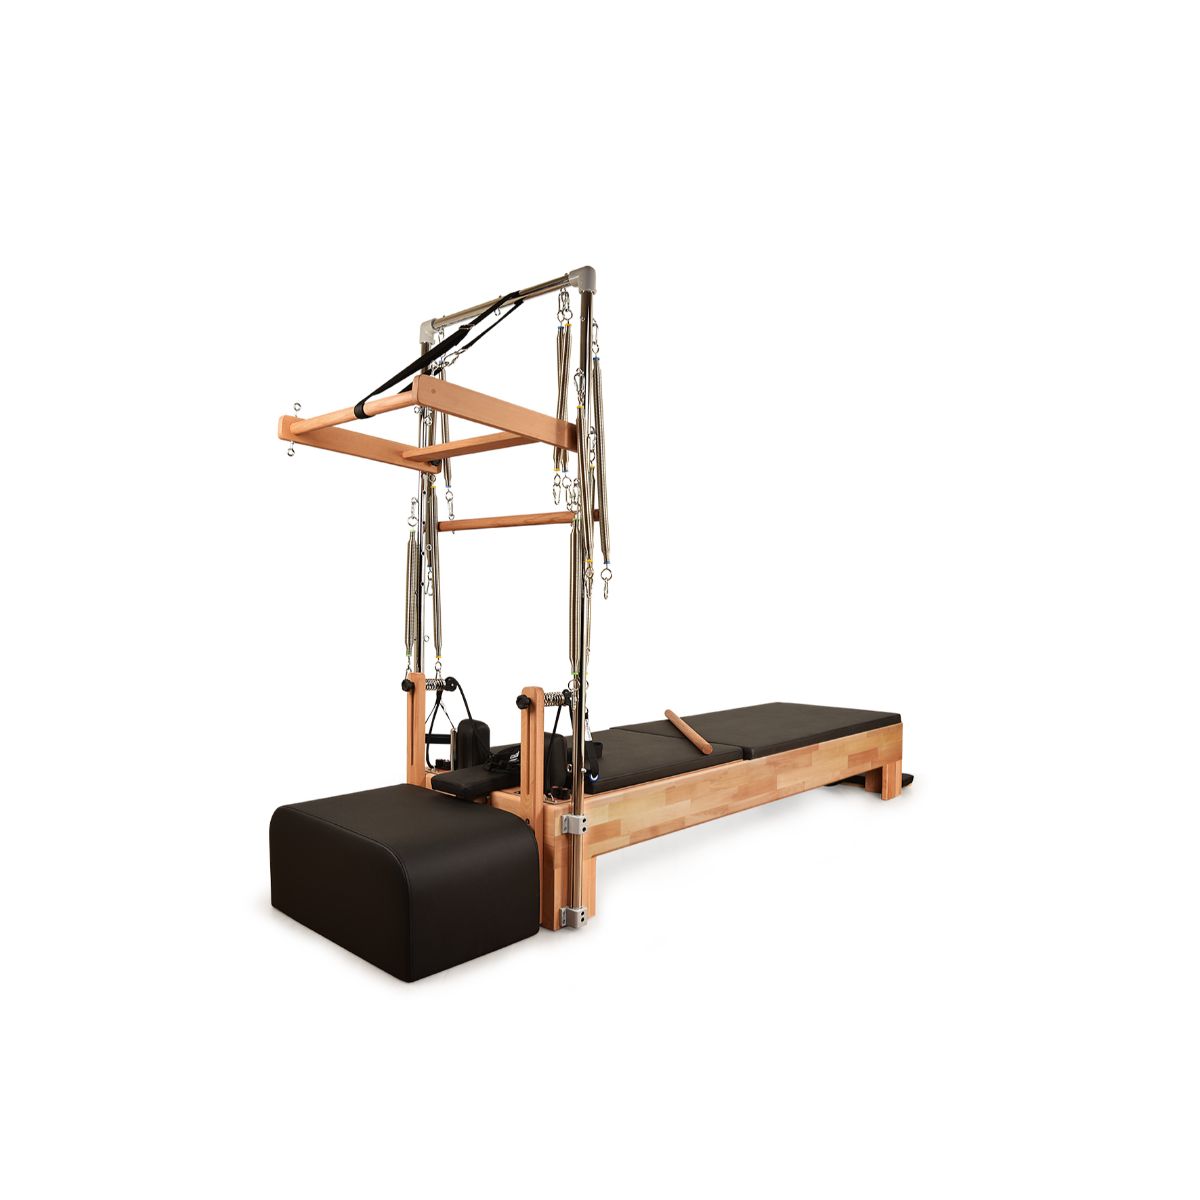 Pilates Wood Reformer With Tower T2 for sale【how much】at